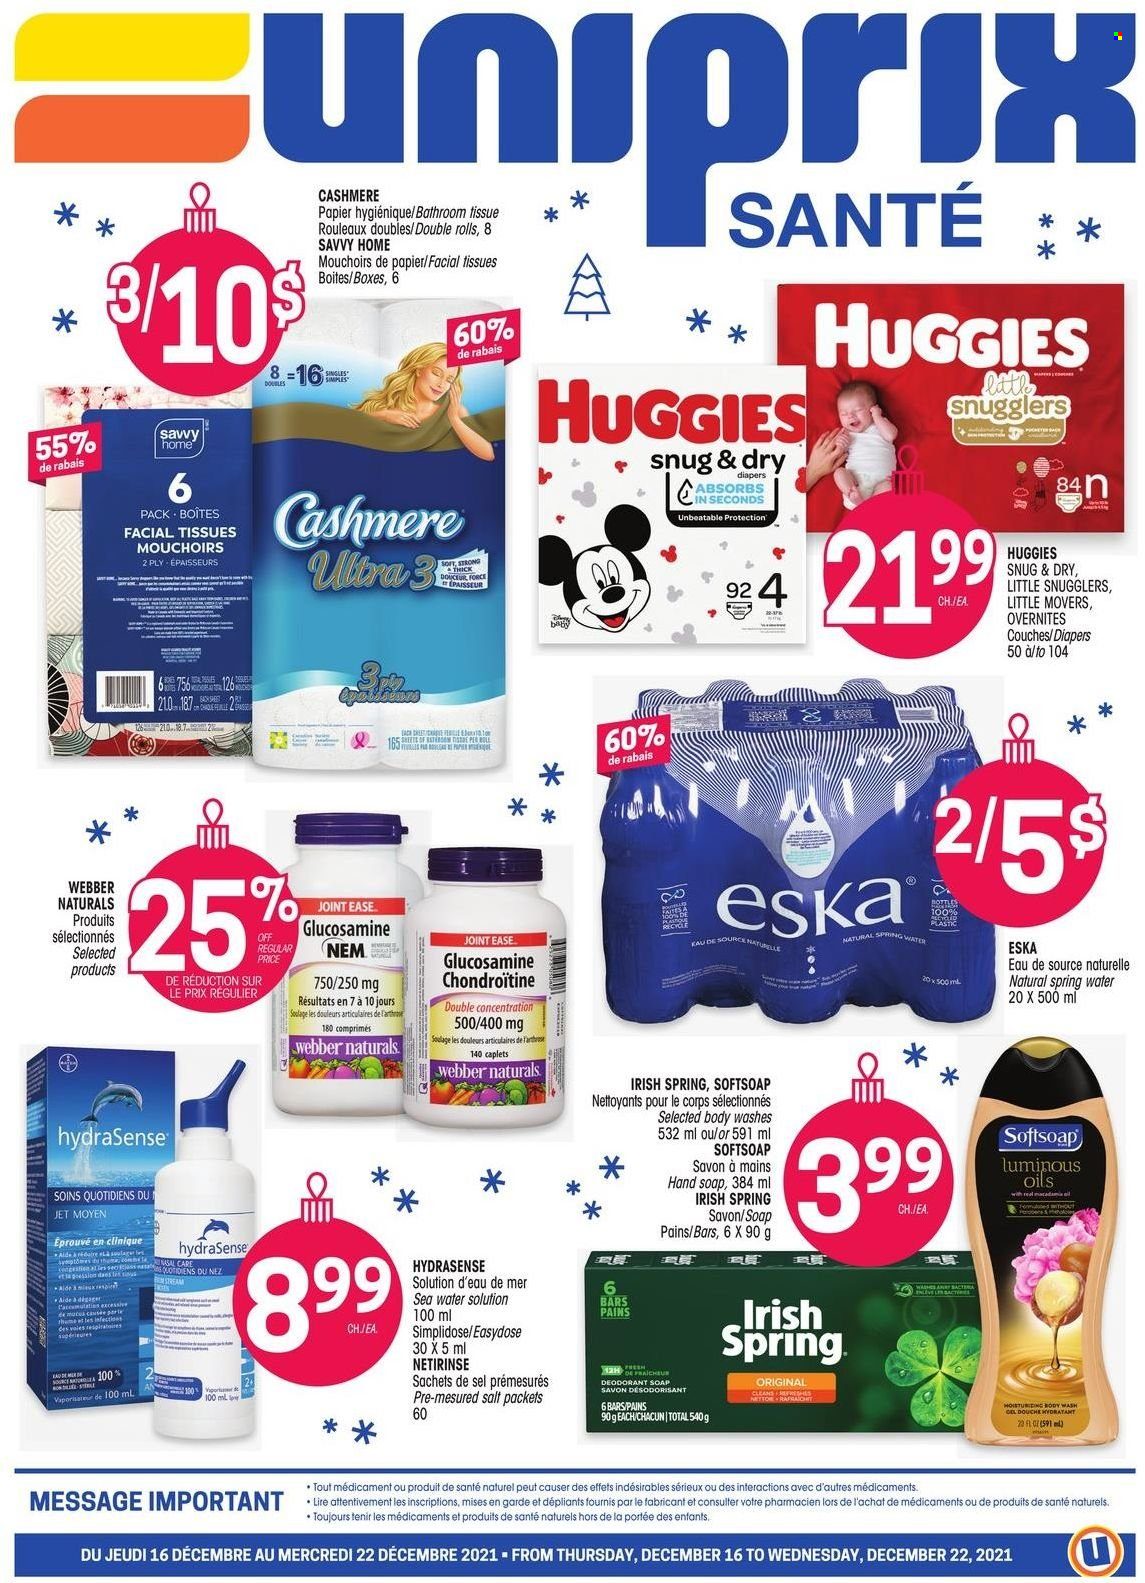 thumbnail - Uniprix Santé Flyer - December 16, 2021 - December 22, 2021 - Sales products - salt, spring water, nappies, bath tissue, Jet, Softsoap, hand soap, soap, Clinique, facial tissues, anti-perspirant, glucosamine, Huggies, deodorant. Page 1.